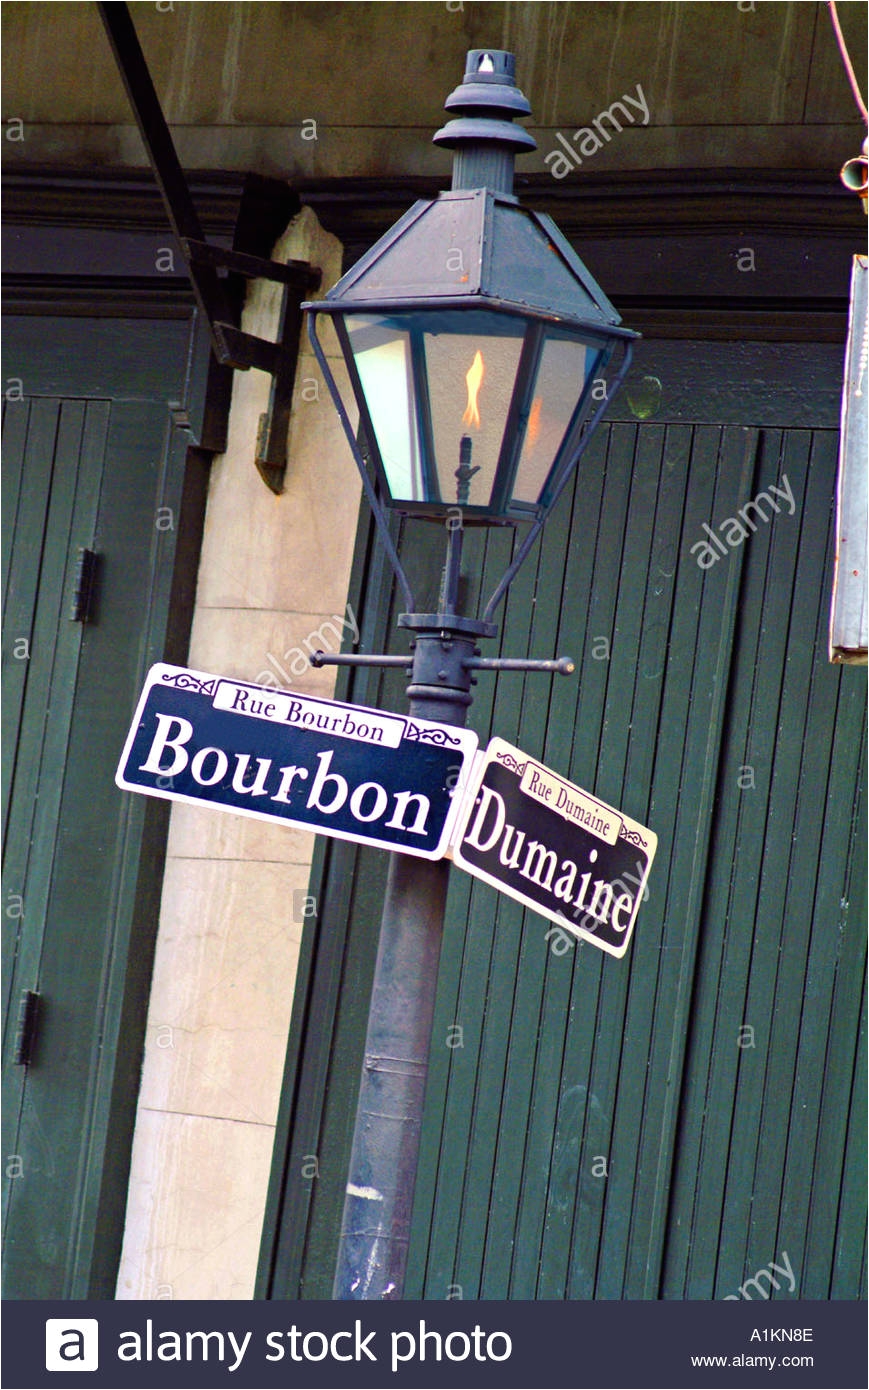 gas lamp and street sign in new orleans louisiana stock image